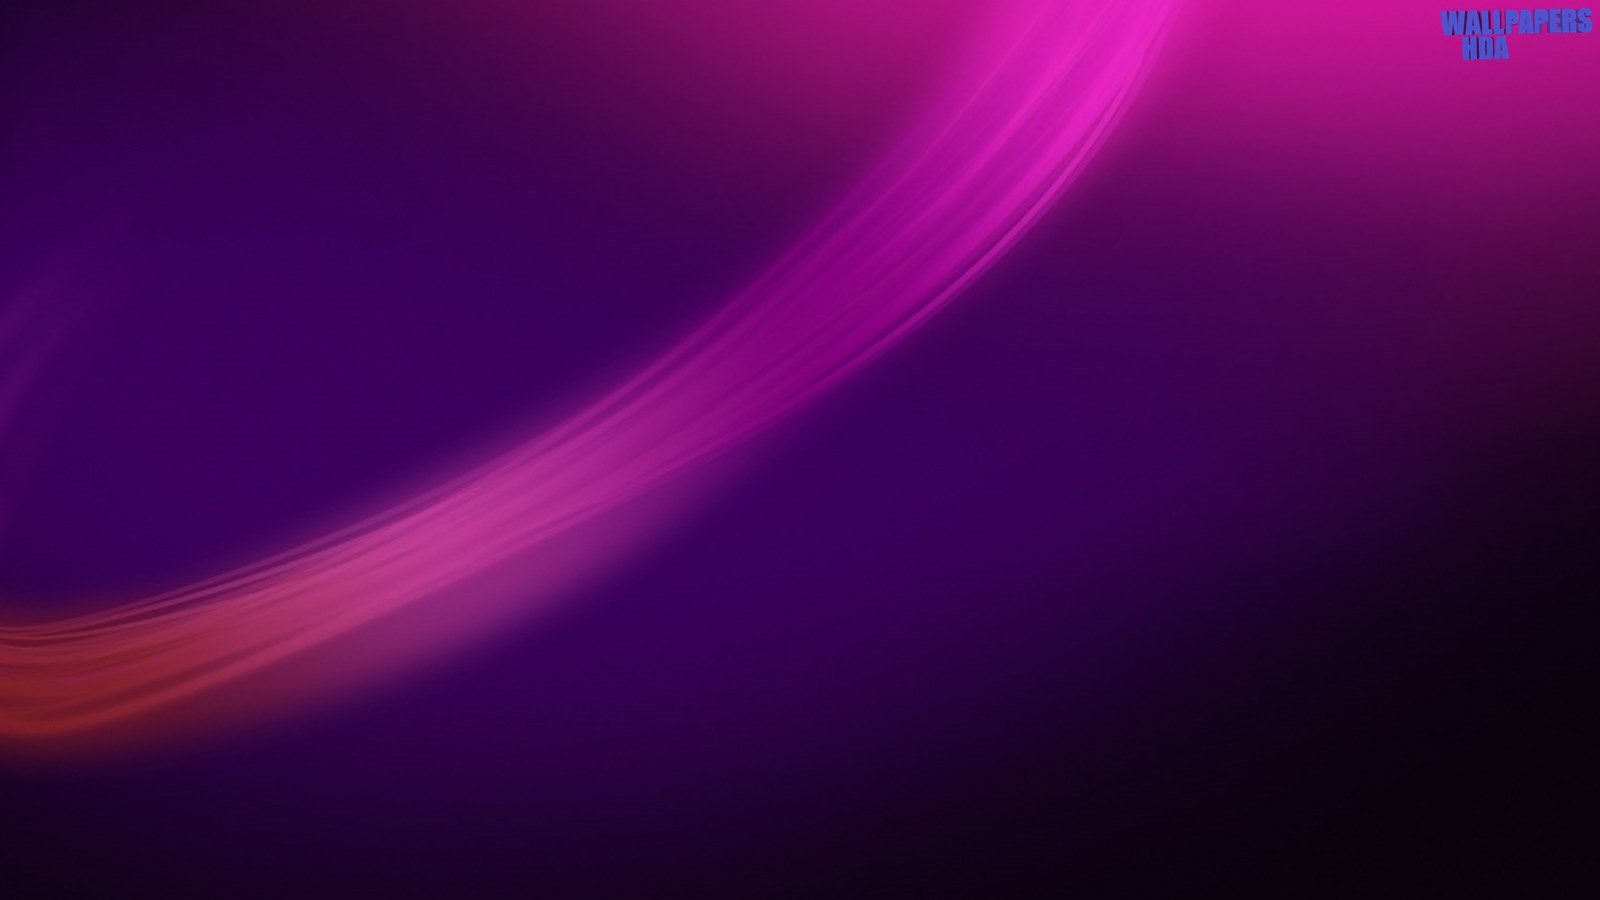 Abstract graphic design violet wallpaper 1600x900